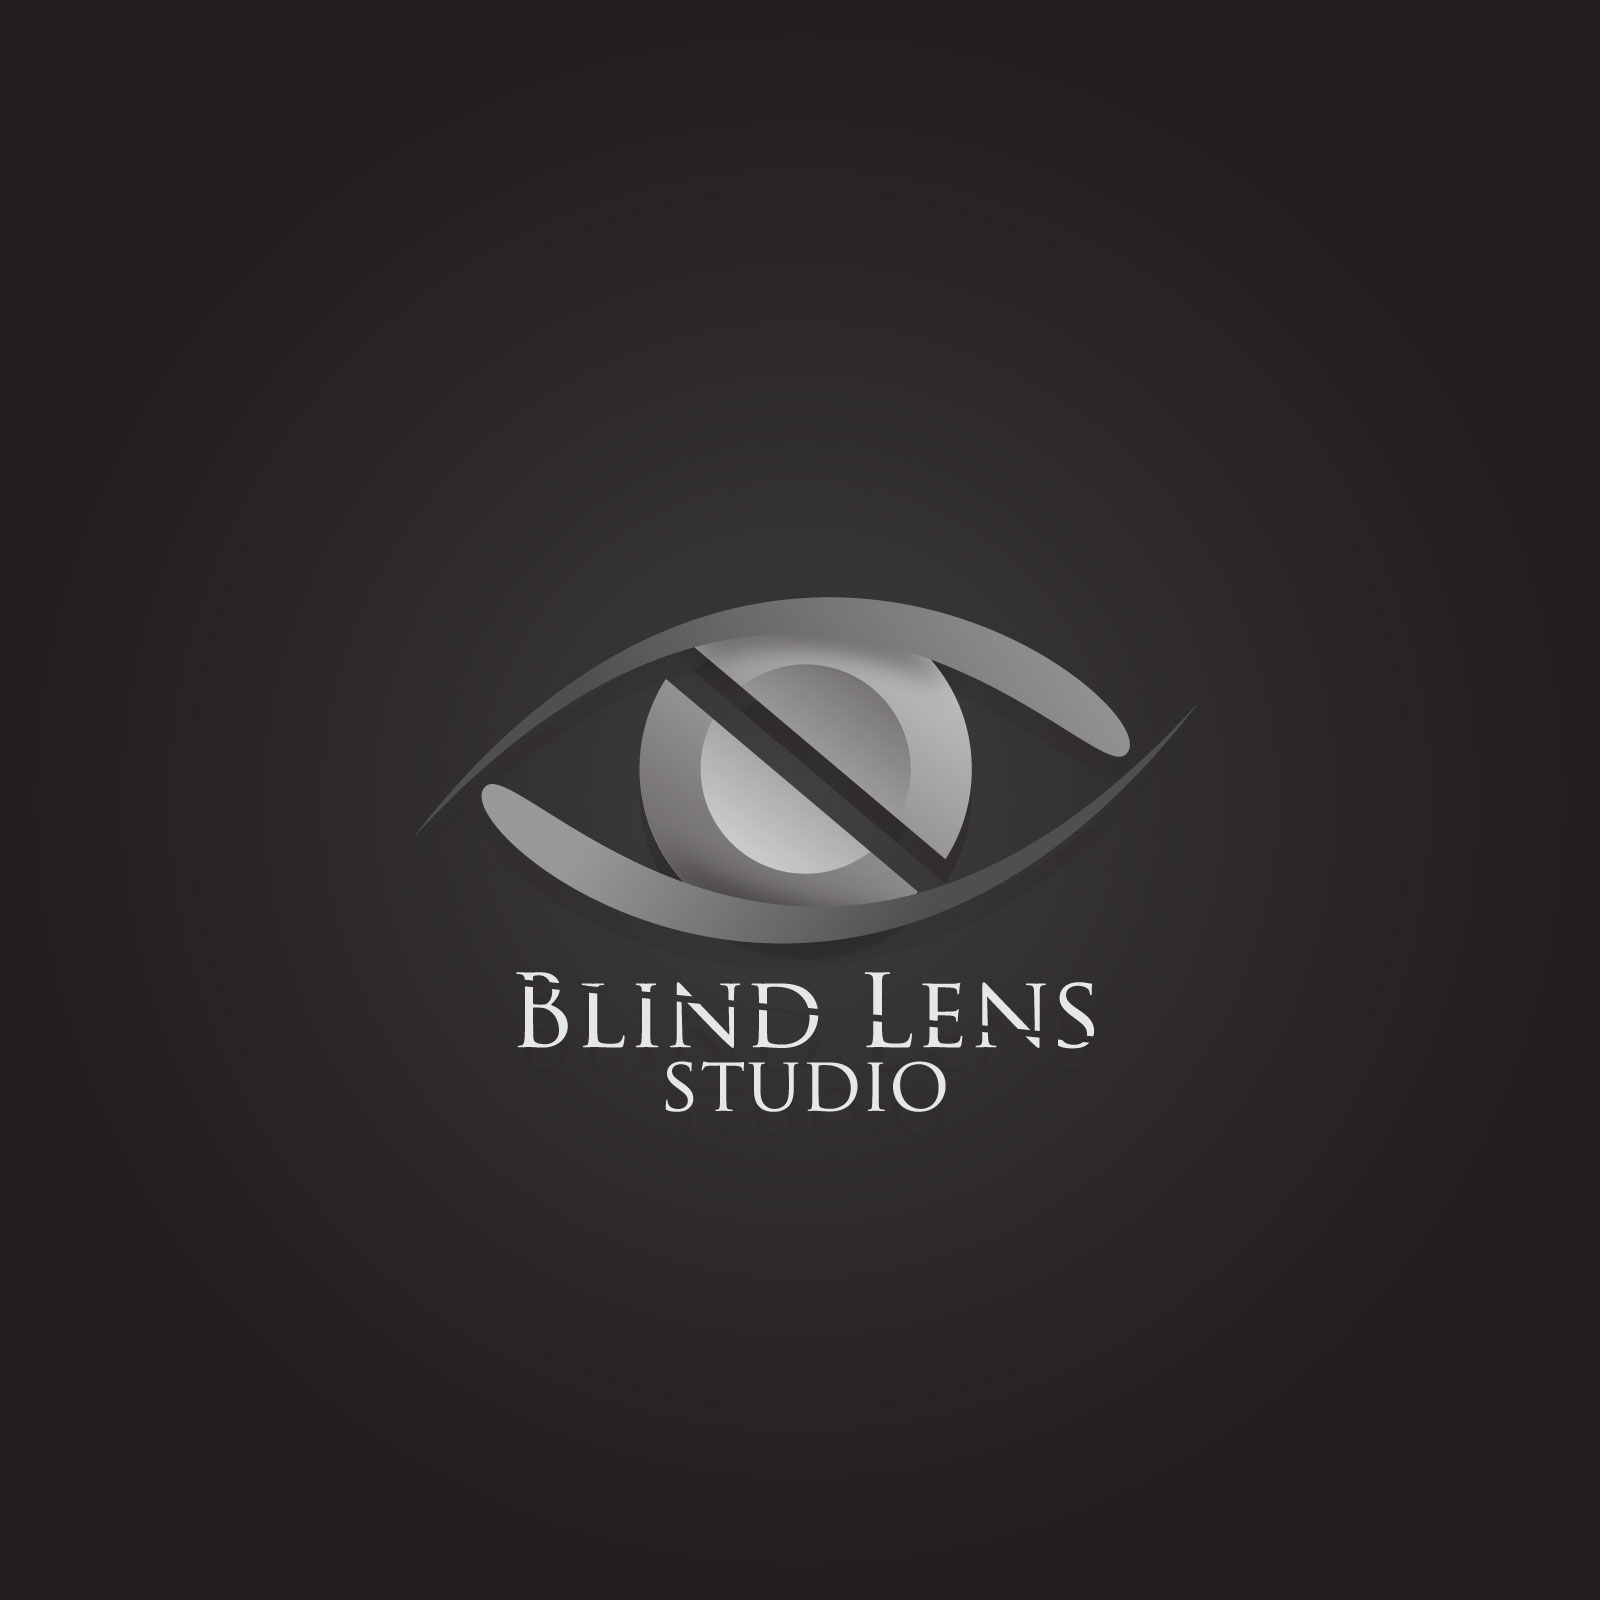 Blind Lens Studio Logo Design
  
  <p>CONCEPT: Create a Brand logo that represents my tradefair company. The company is a visual development studio that provides visual content for the entertainment industries. </p>
  <p>HOW DESIGN SOLVES PROBLEMS:  eye that is cut in half creates a double imagery of lenses and a blind eye. The logo is colorless which relates to the brand name.</p>
  <p>PROCESS: sketches/ refined digitally</p>
  <p>TOOLS USED:  pen/ paper Illustrator</p>
  <p>CHALLENGES:  creating a visual link between 'lenses' and 'blind'</p>